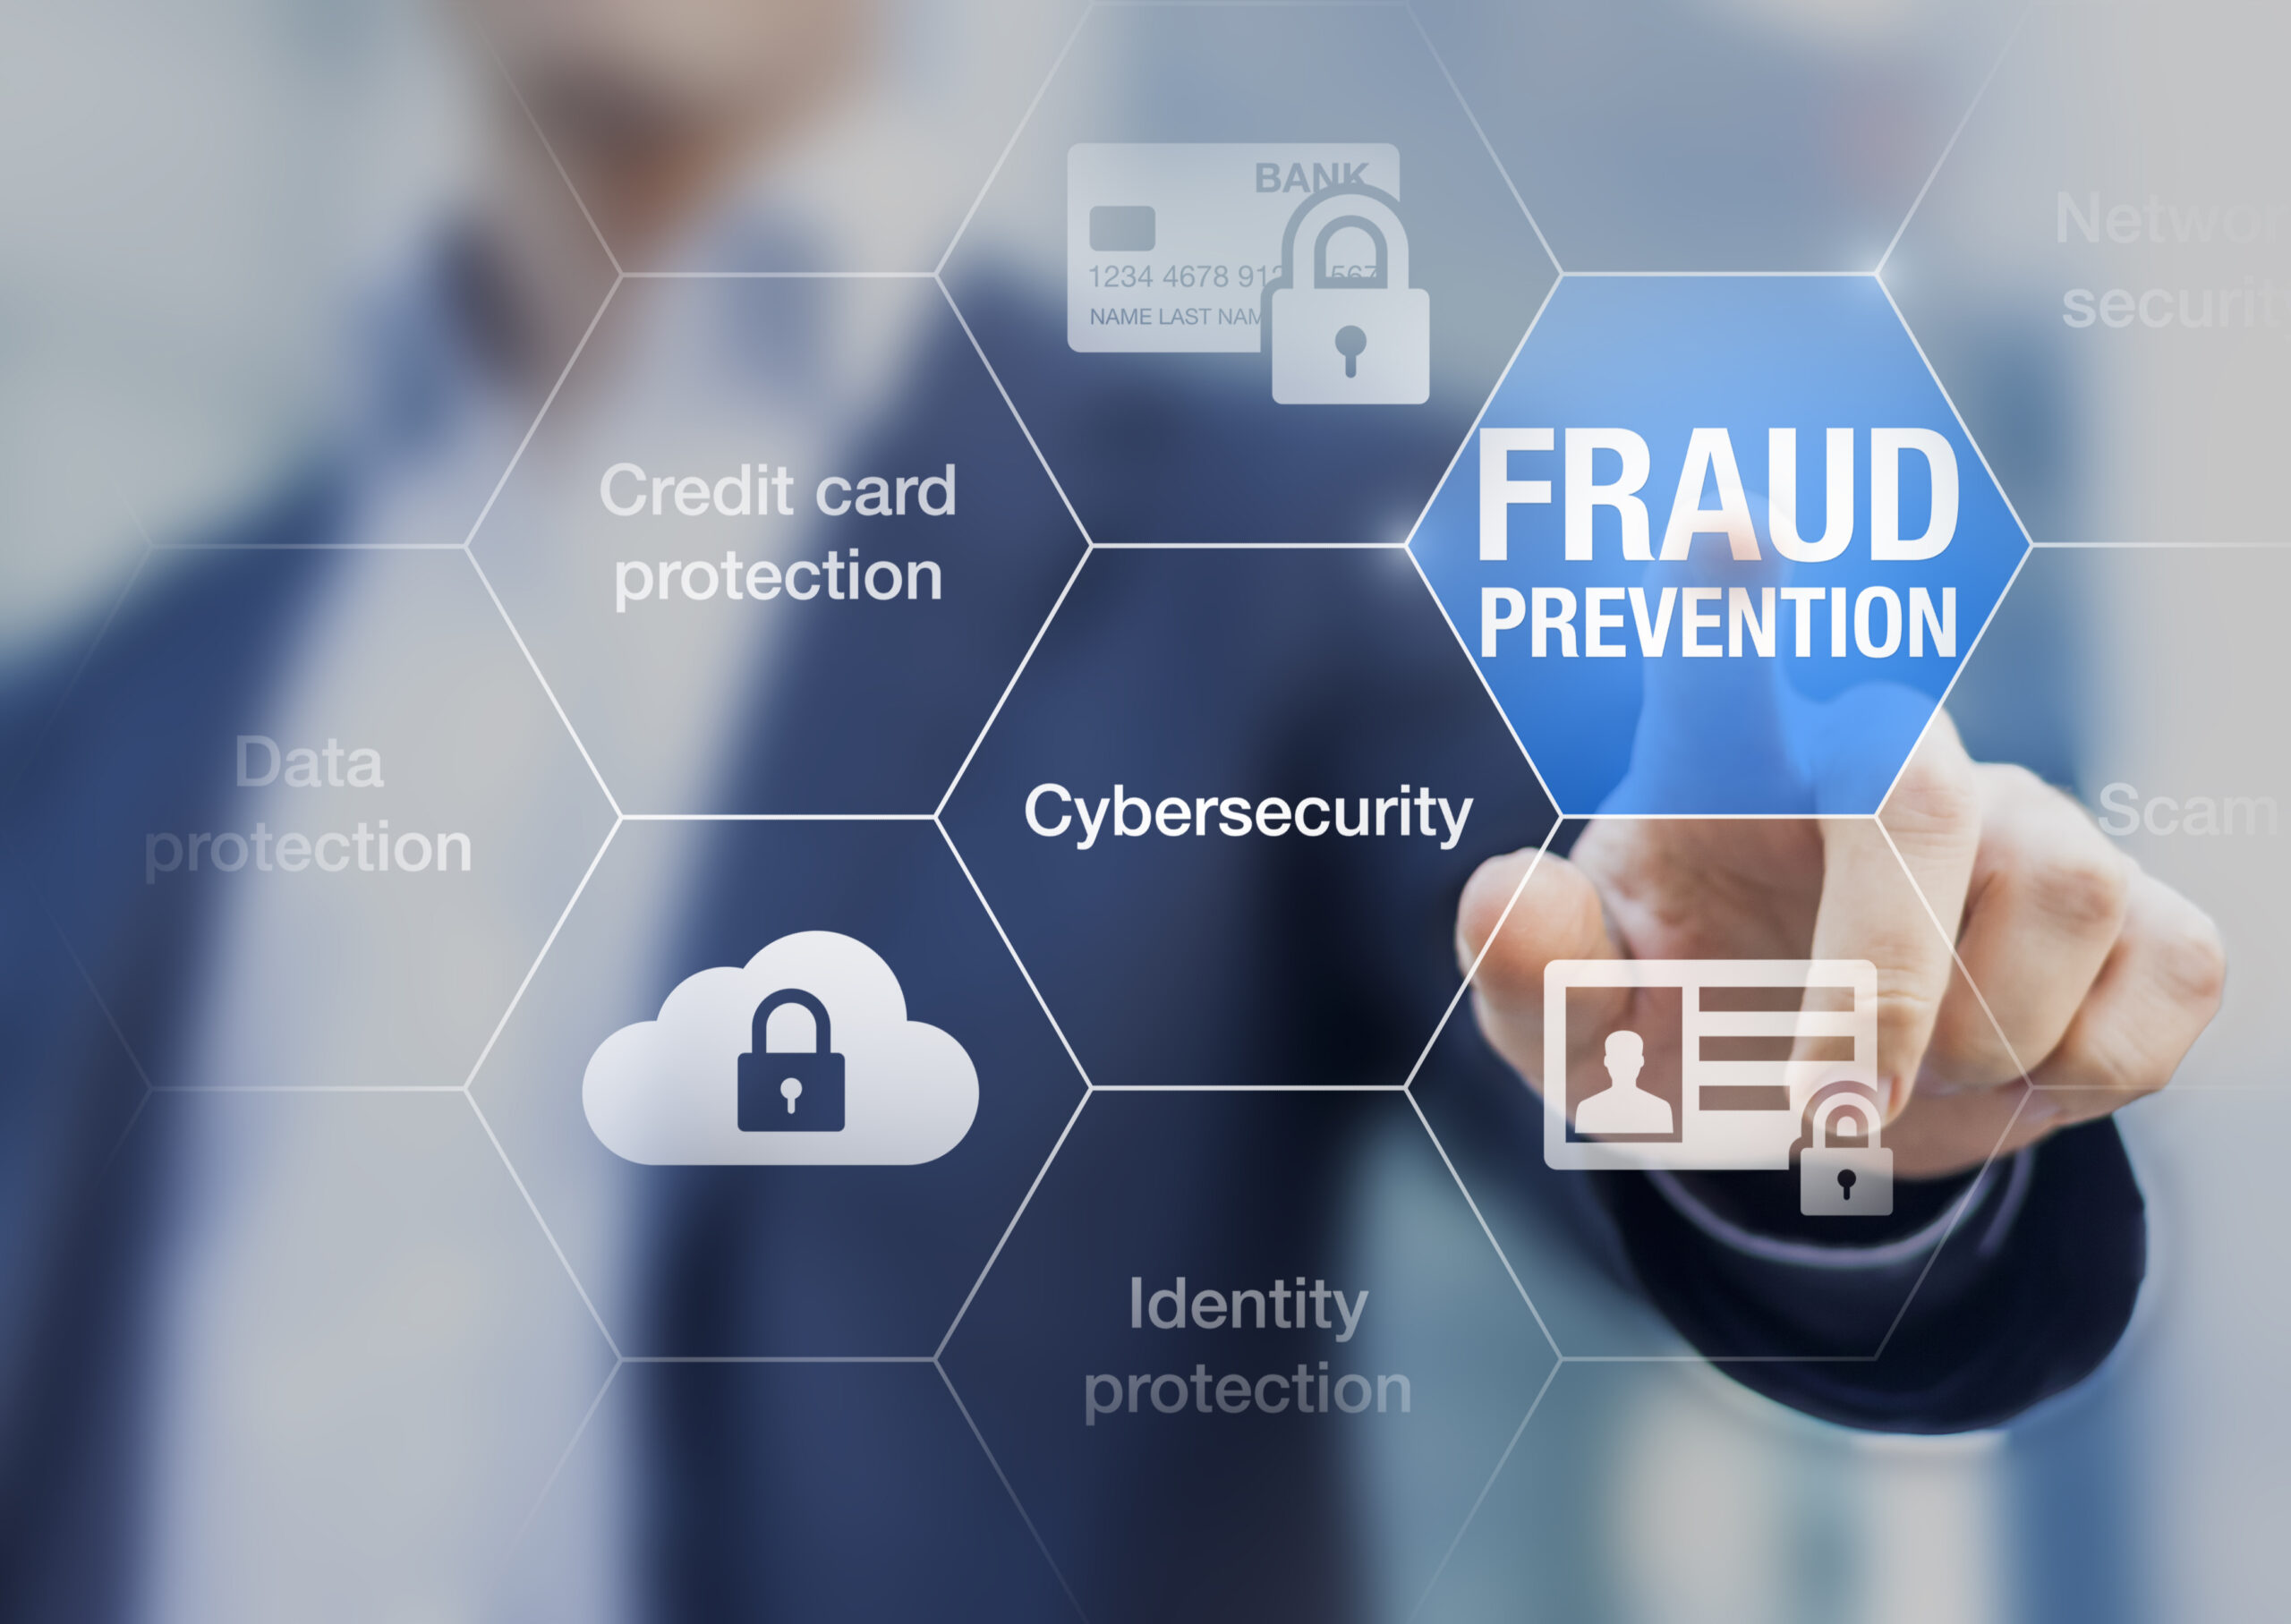 Protection from digital fraud